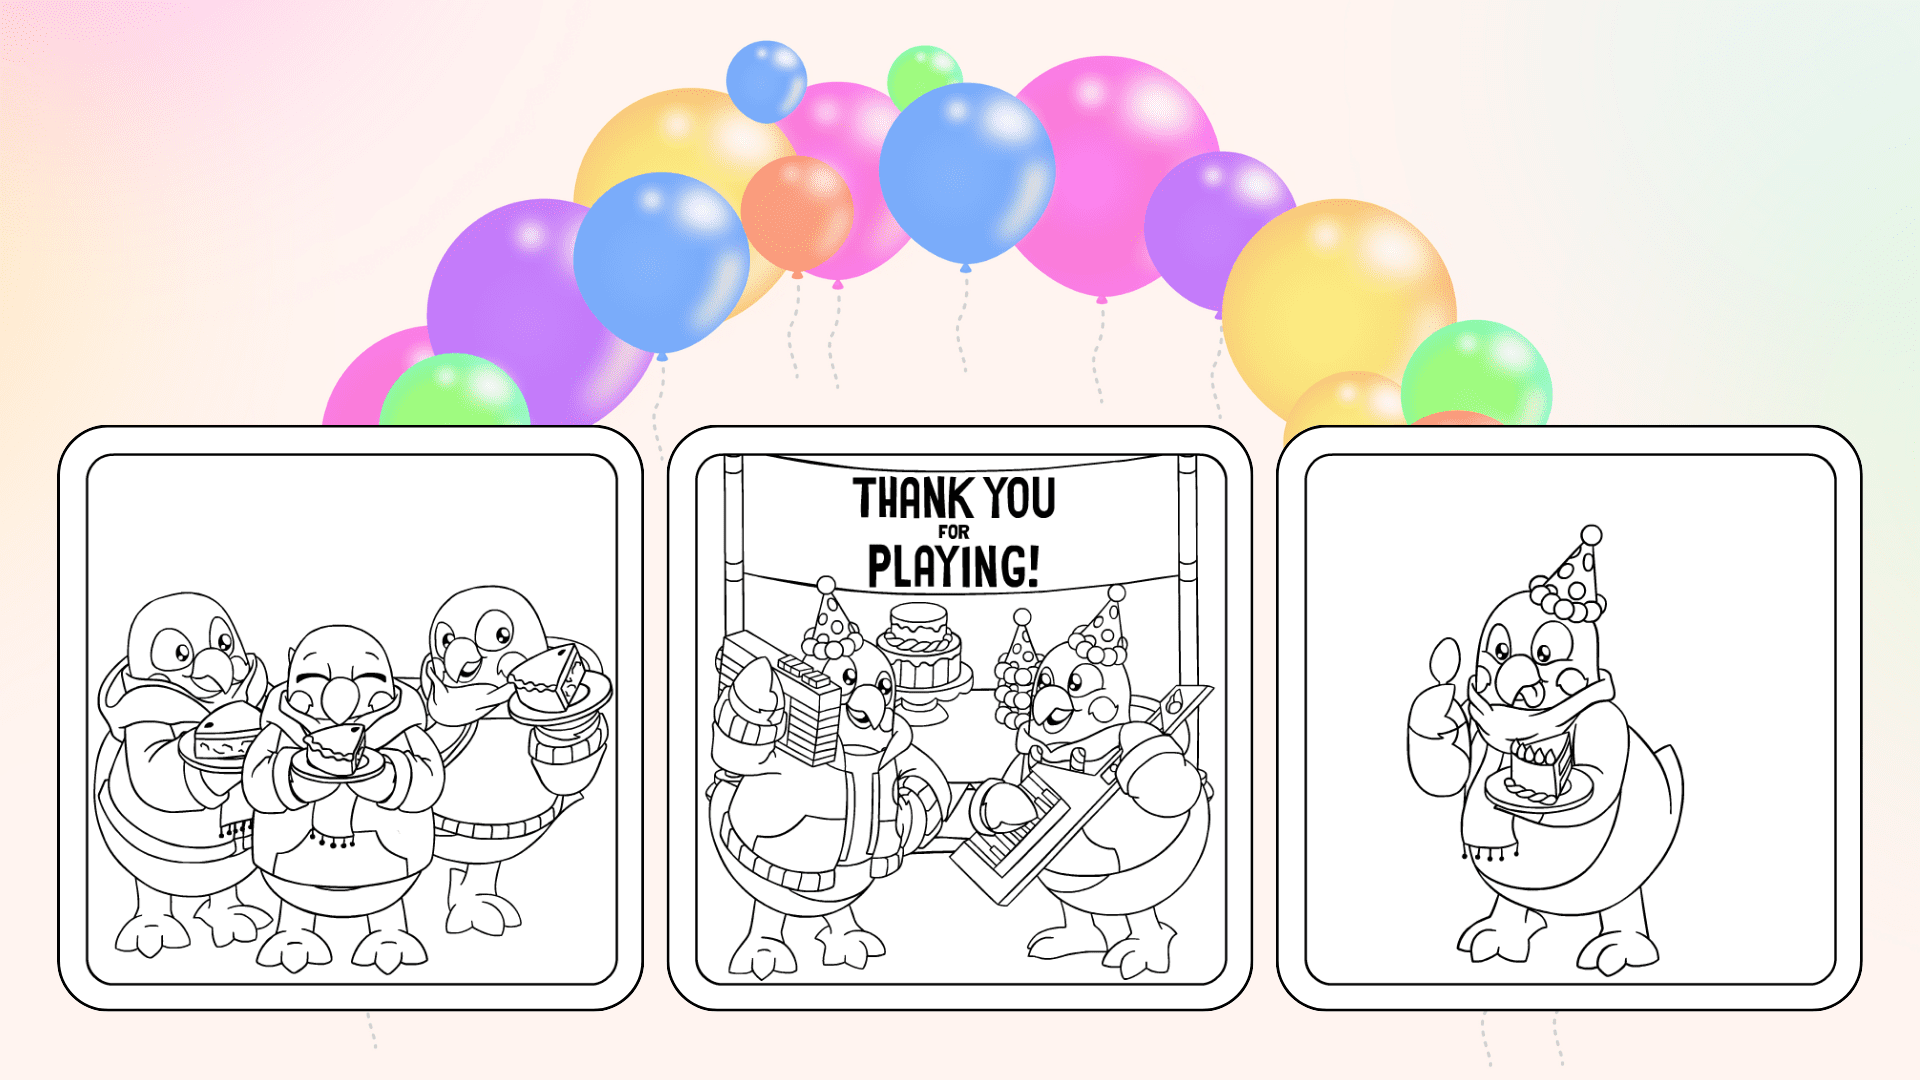 A layout of three anniversary coloring pages for kids. The background shows pastel-colored balloons in blue, pink, purple, and green.